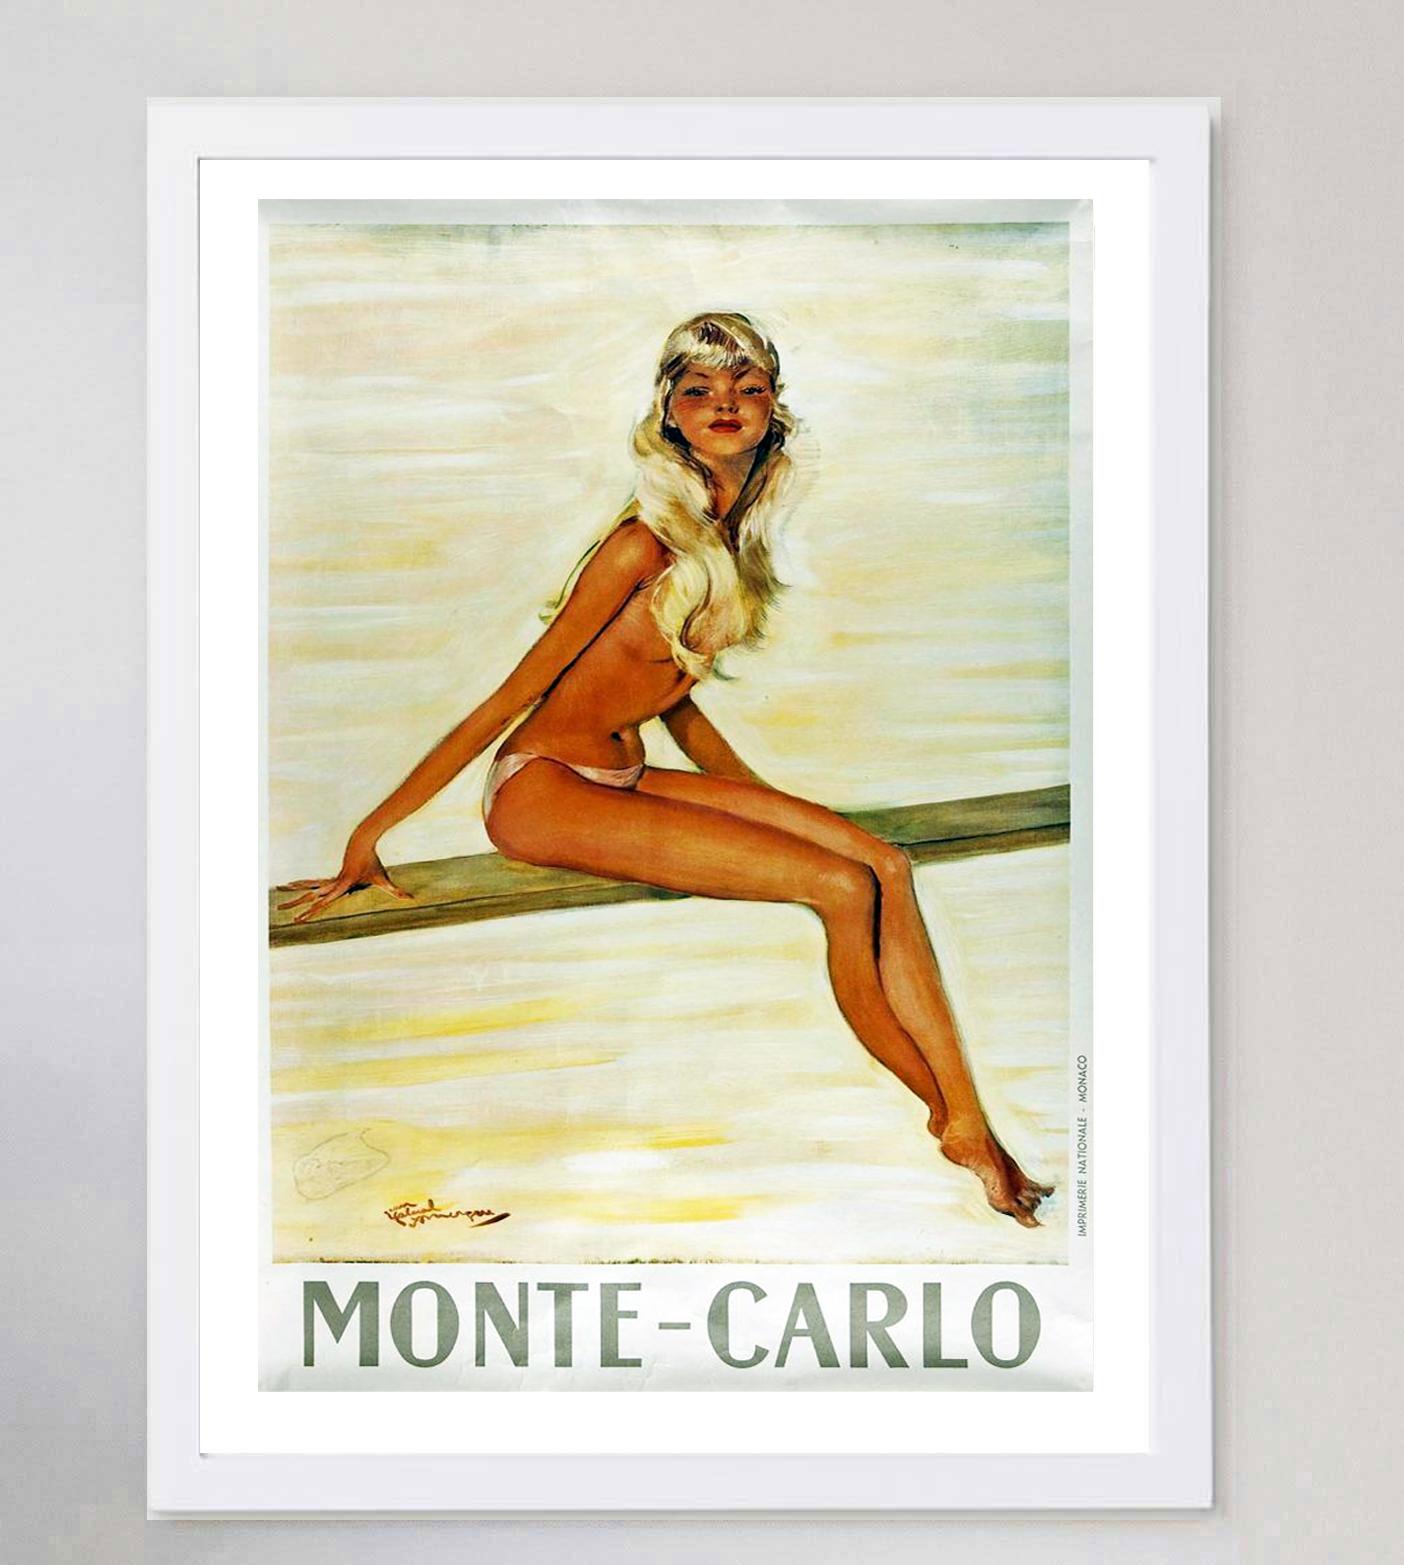 French 1950 Monte-Carlo Original Vintage Poster For Sale